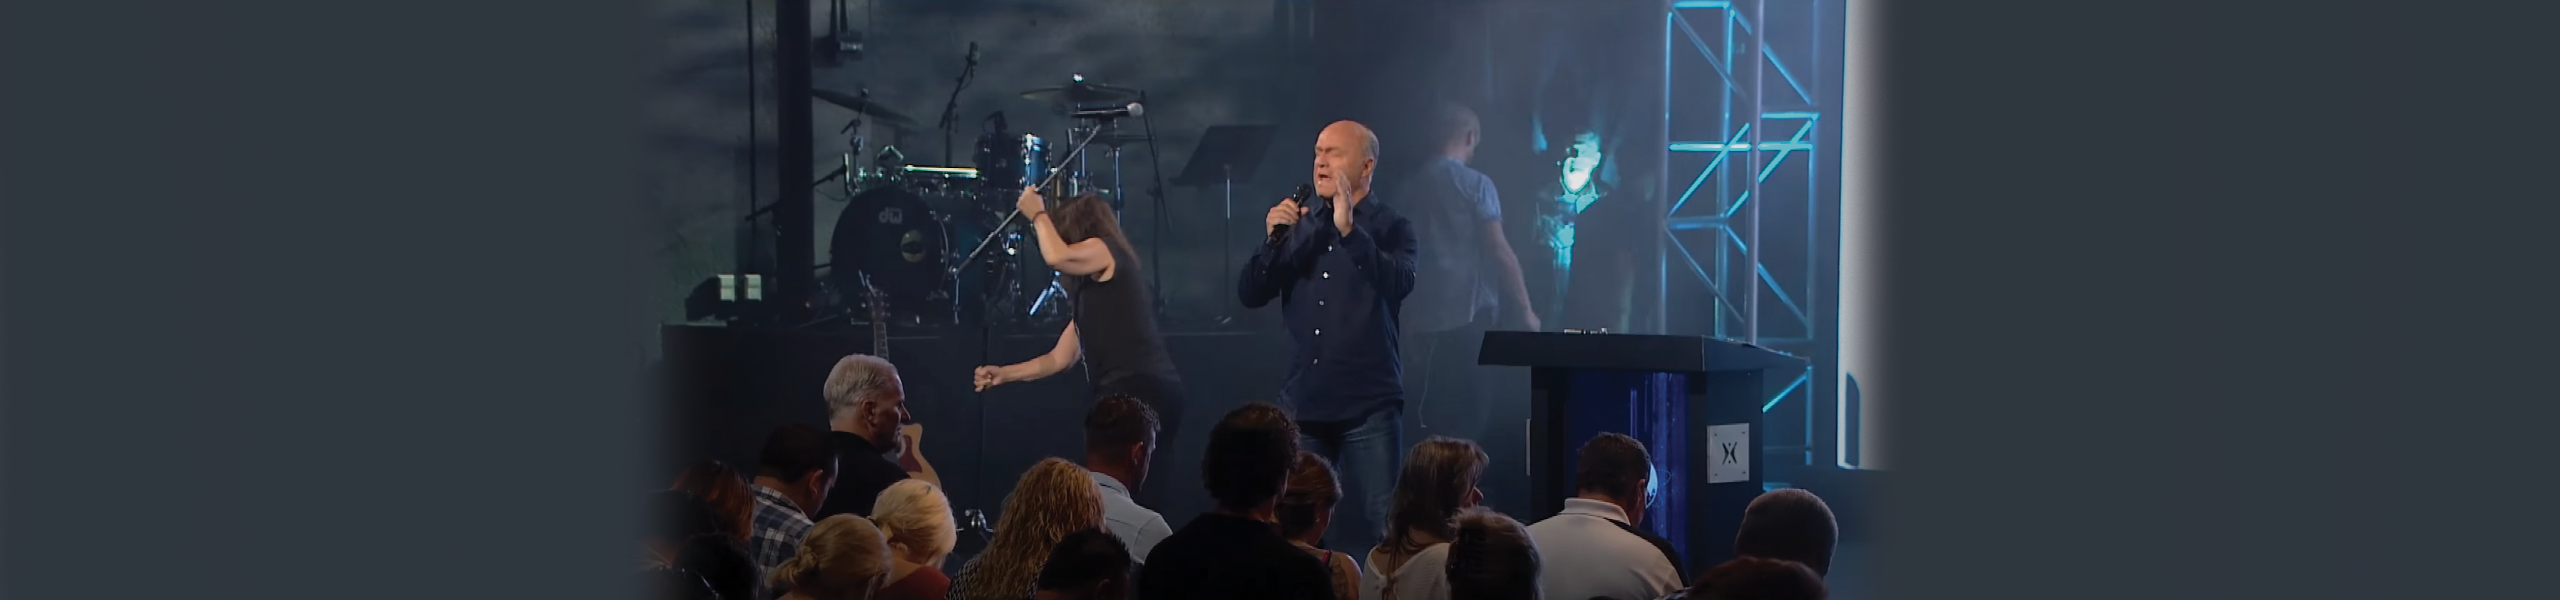 World Changers: Lessons from the book of Hebrews | Greg Laurie